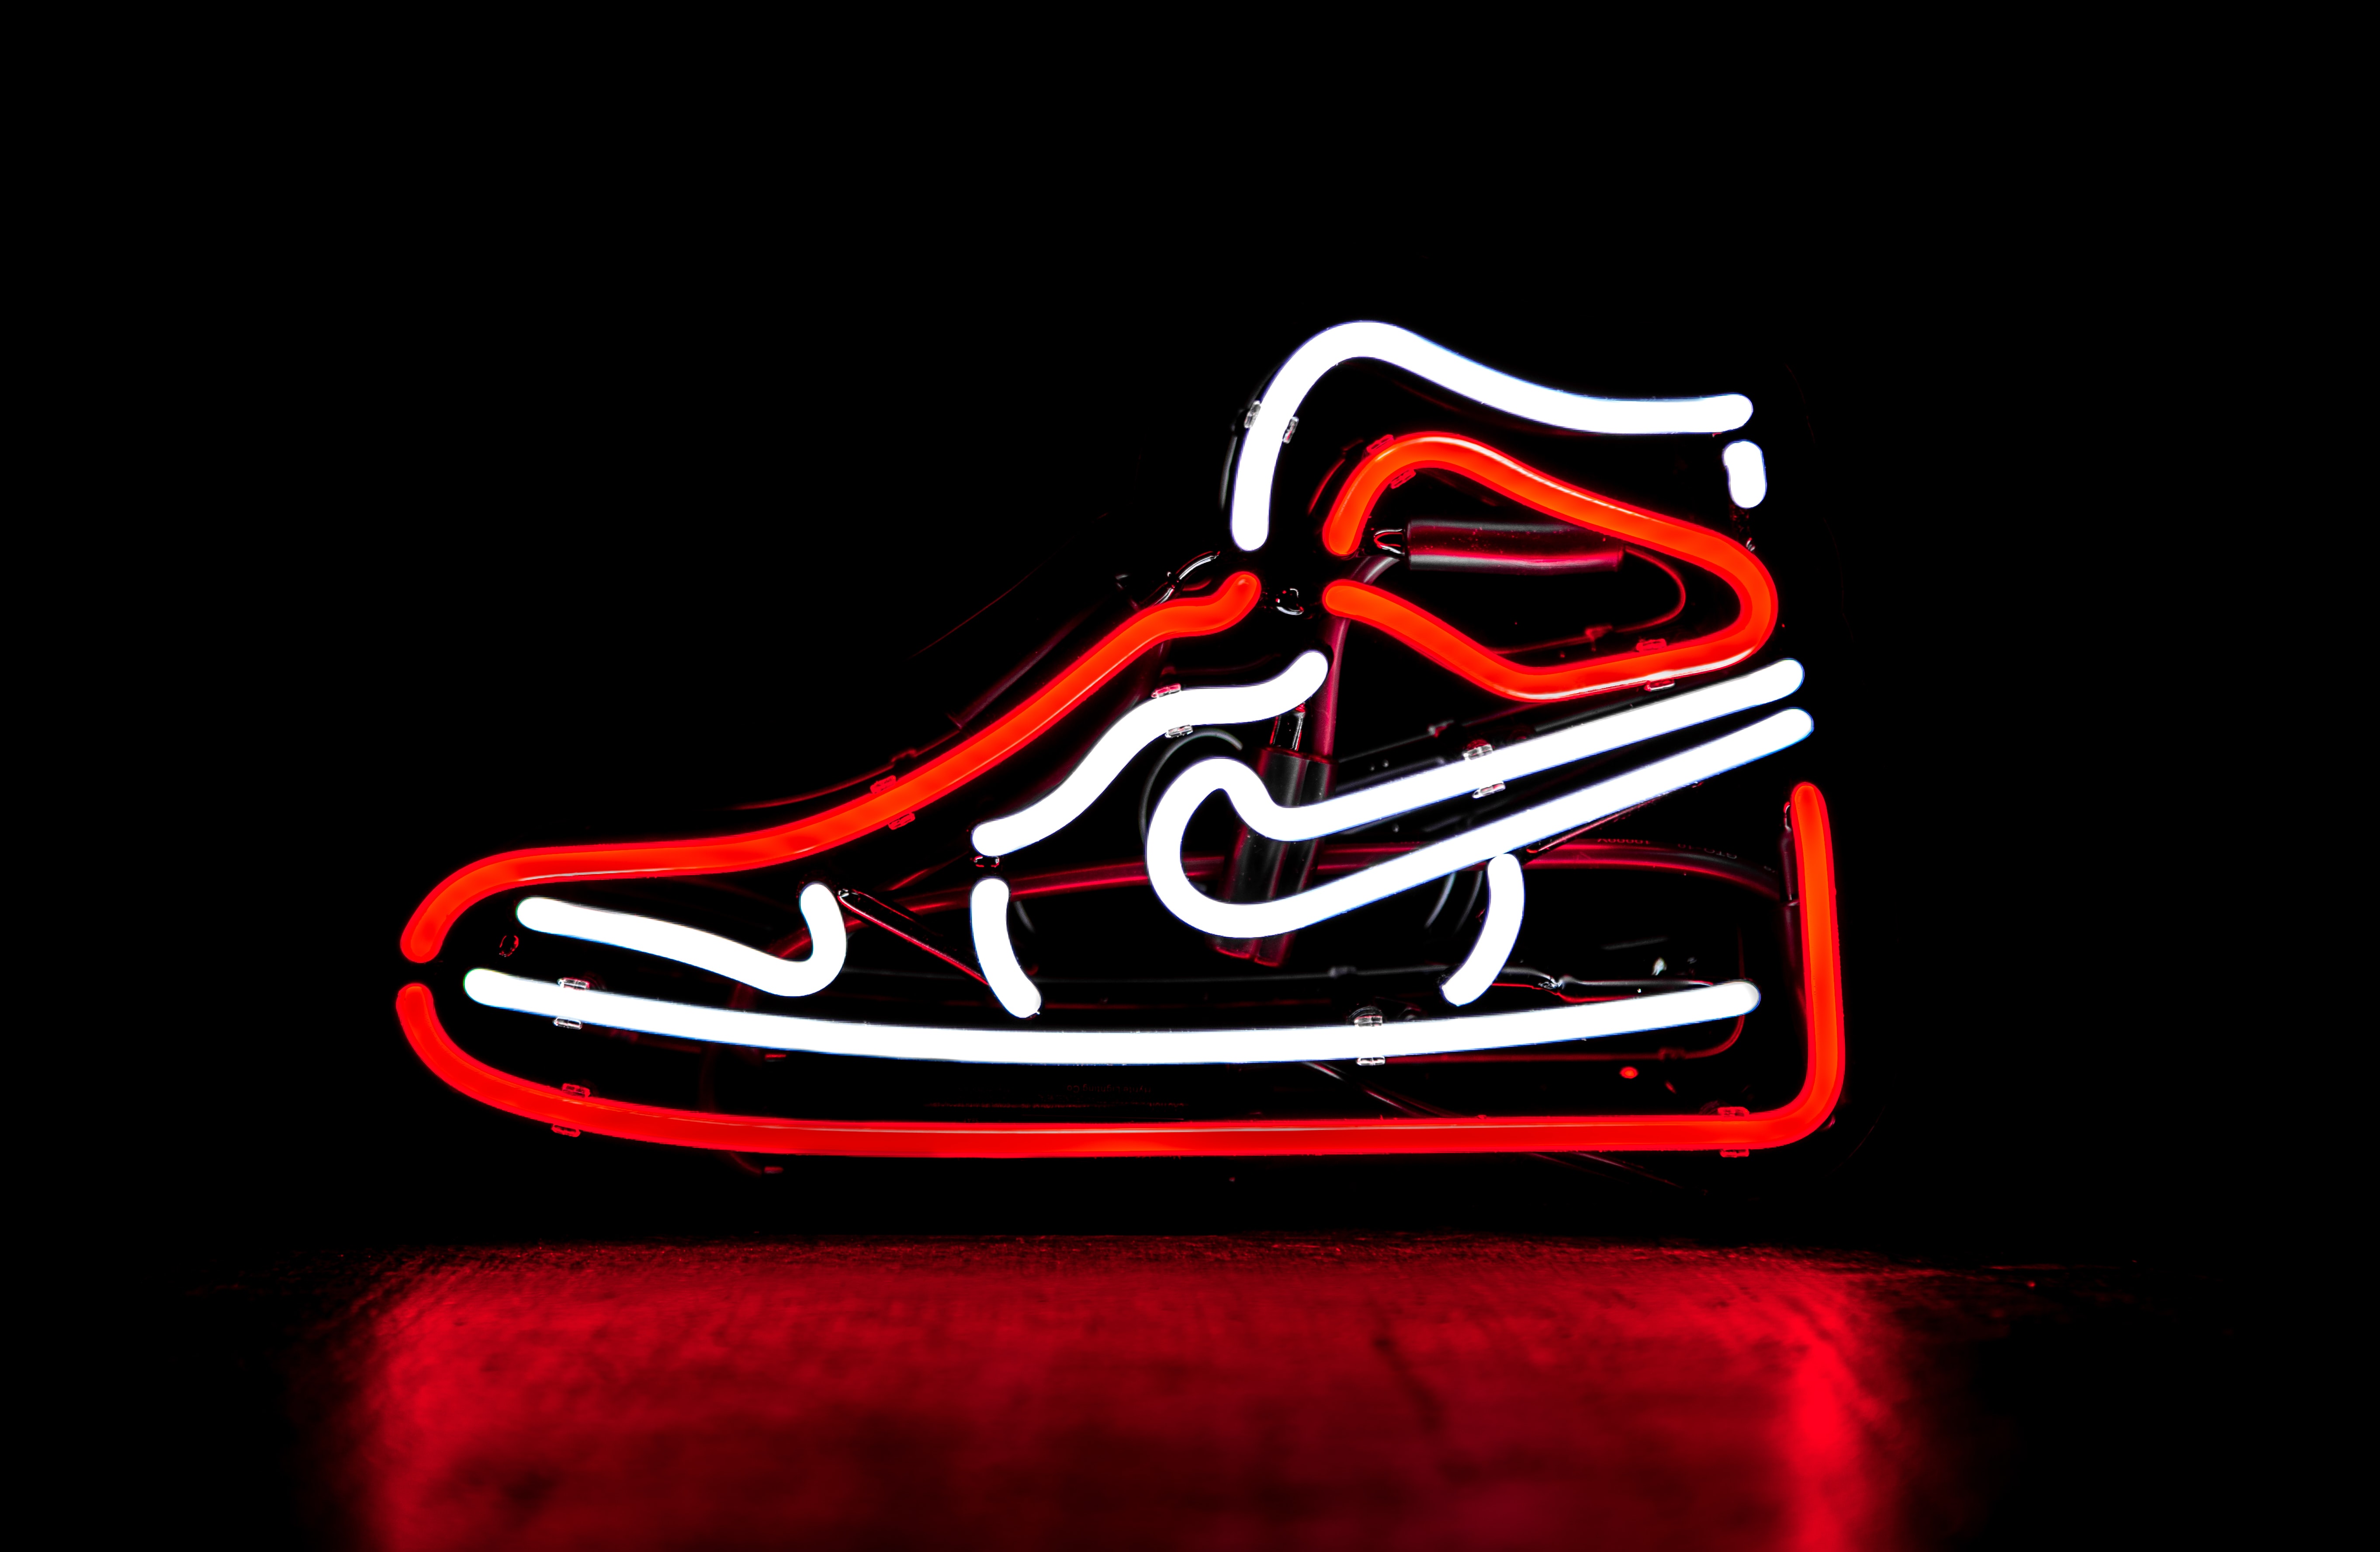 Air Jordans Shoes Come In Red And Black Background, Jordan Shoes Pictures,  Jordan, Design Background Image And Wallpaper for Free Download